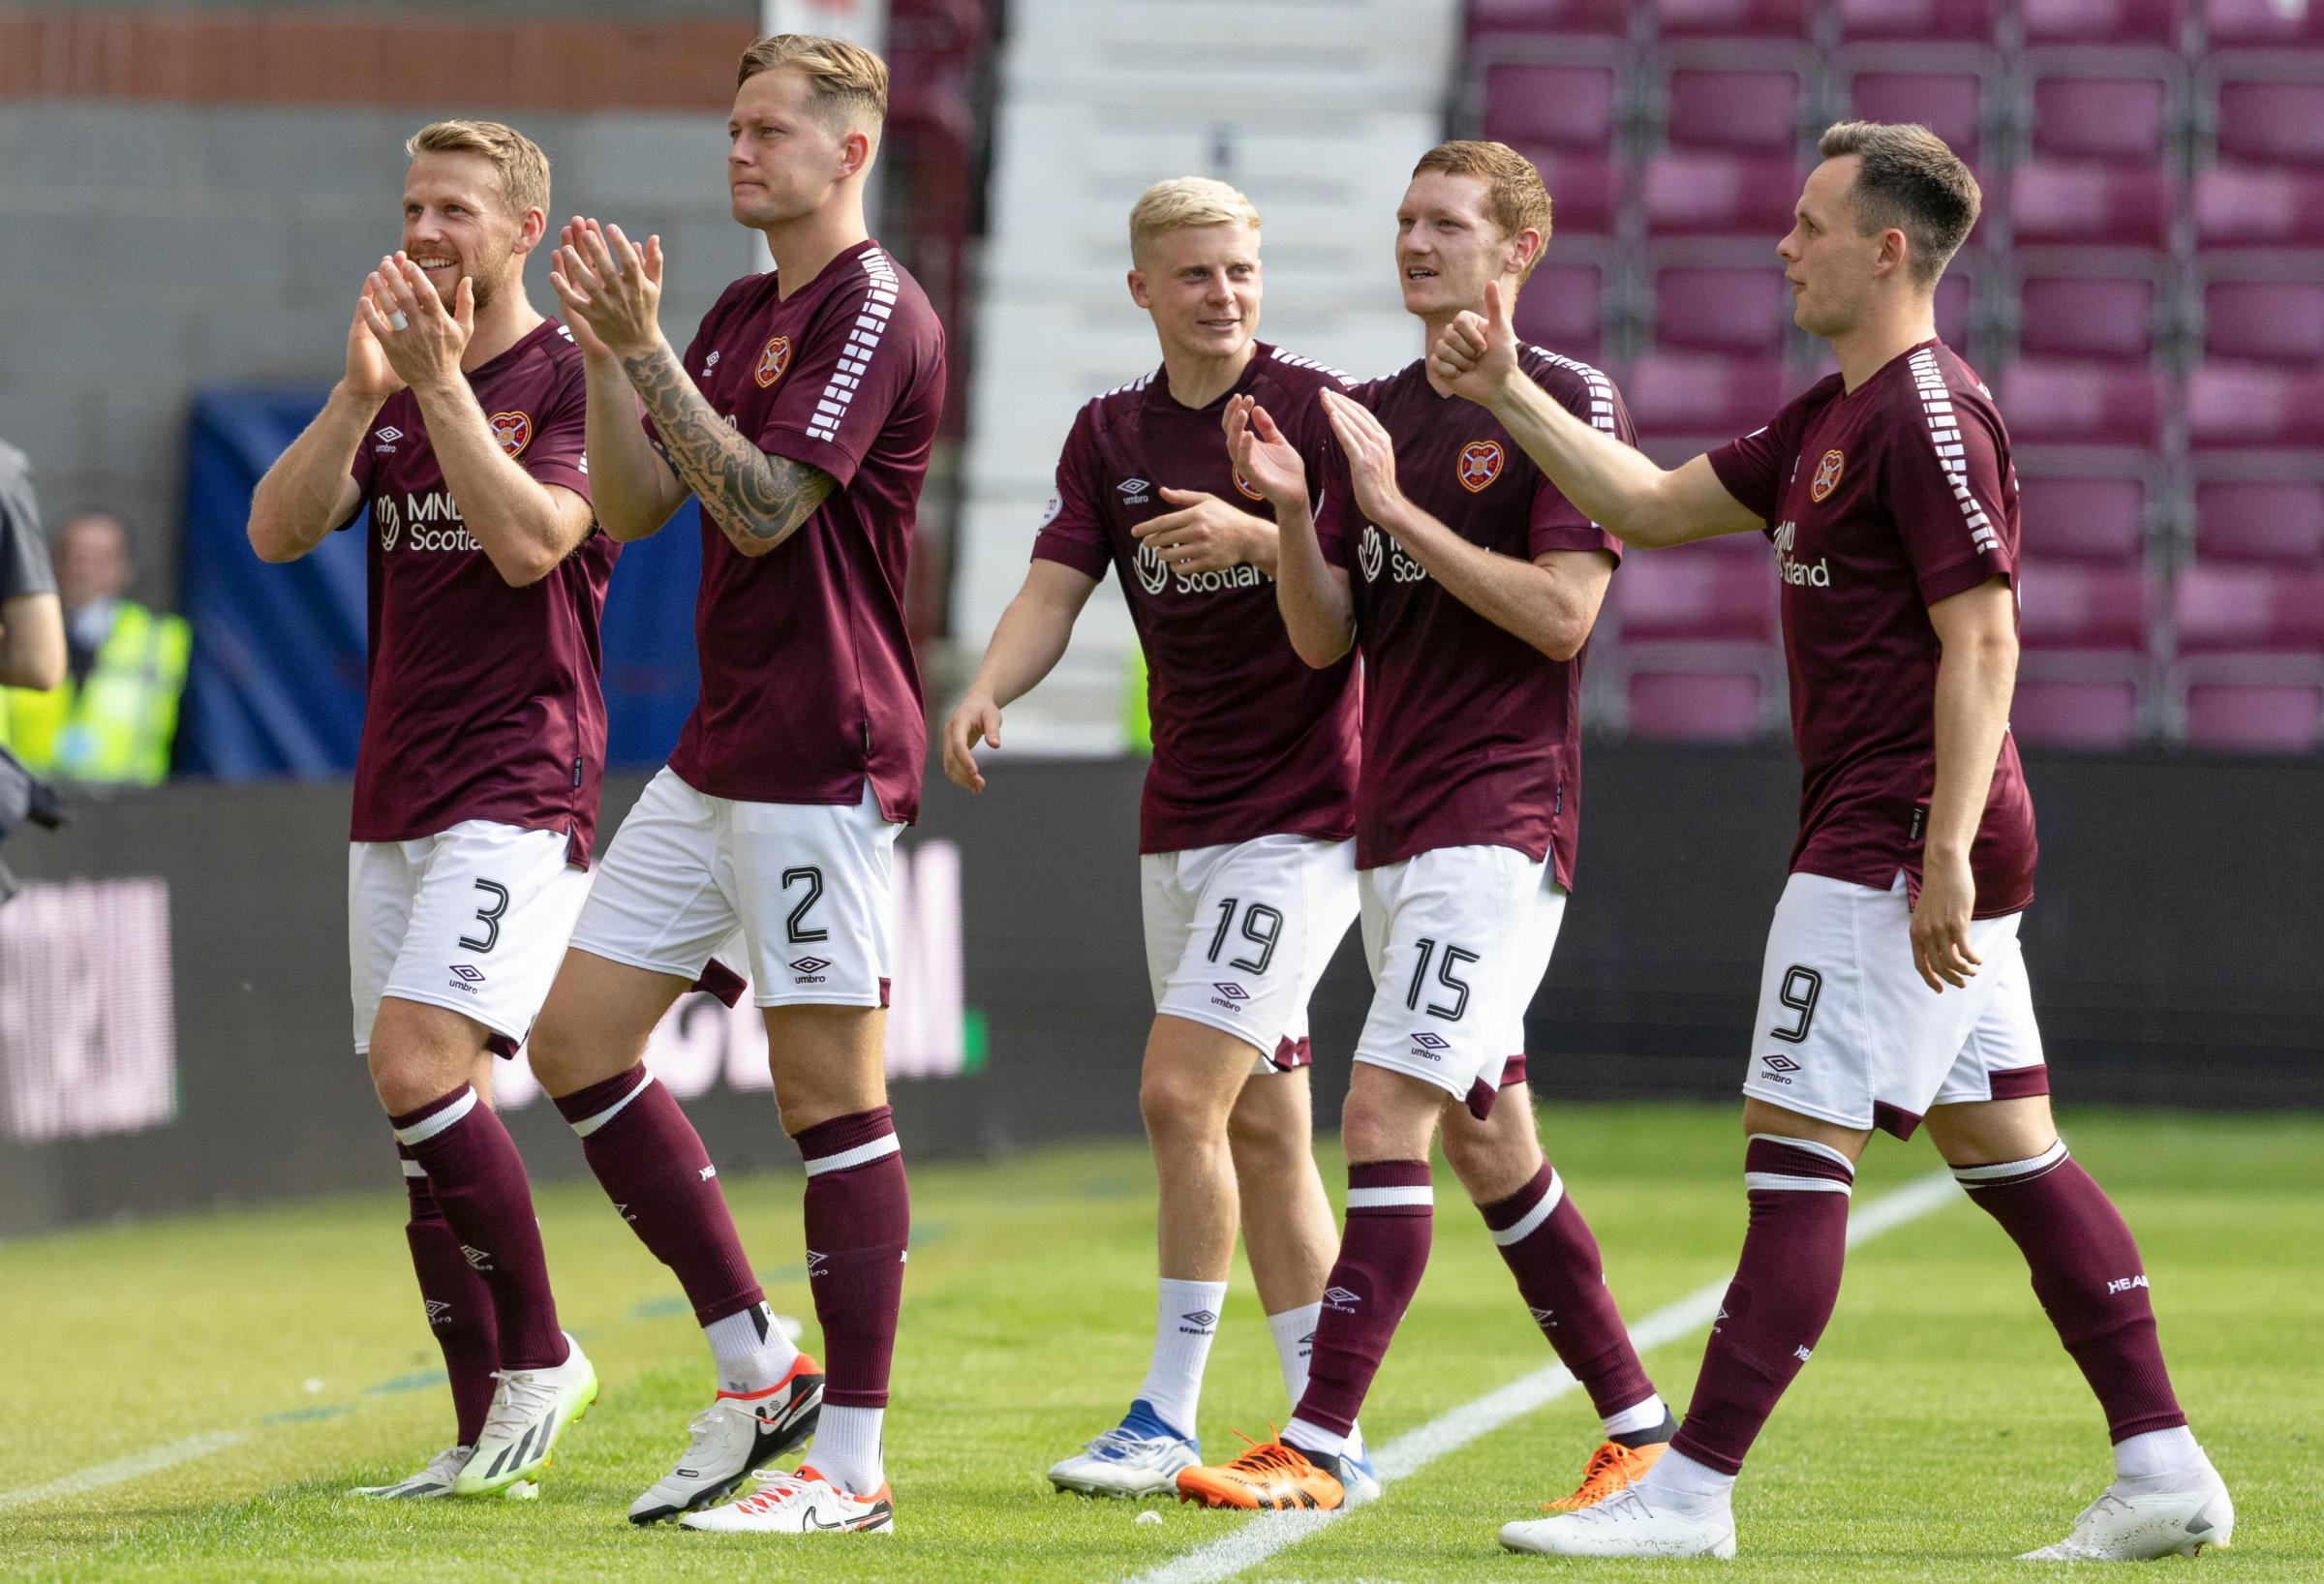 Hearts' strength in depth bodes well ahead of busy season